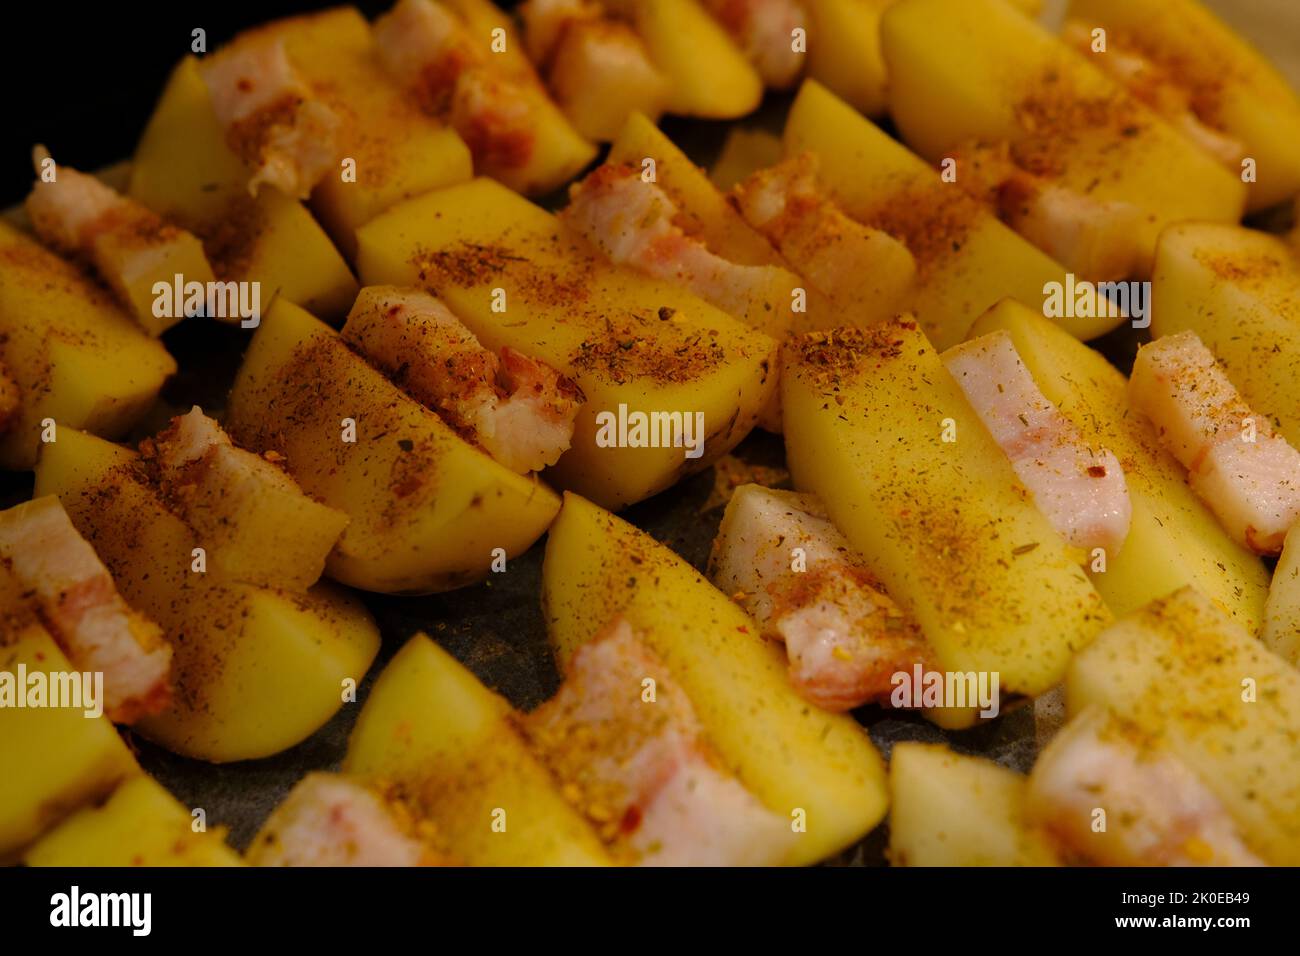 Delicious Potato Bratkartoffeln With Bacon close up in the plate on ready to bake. Stock Photo